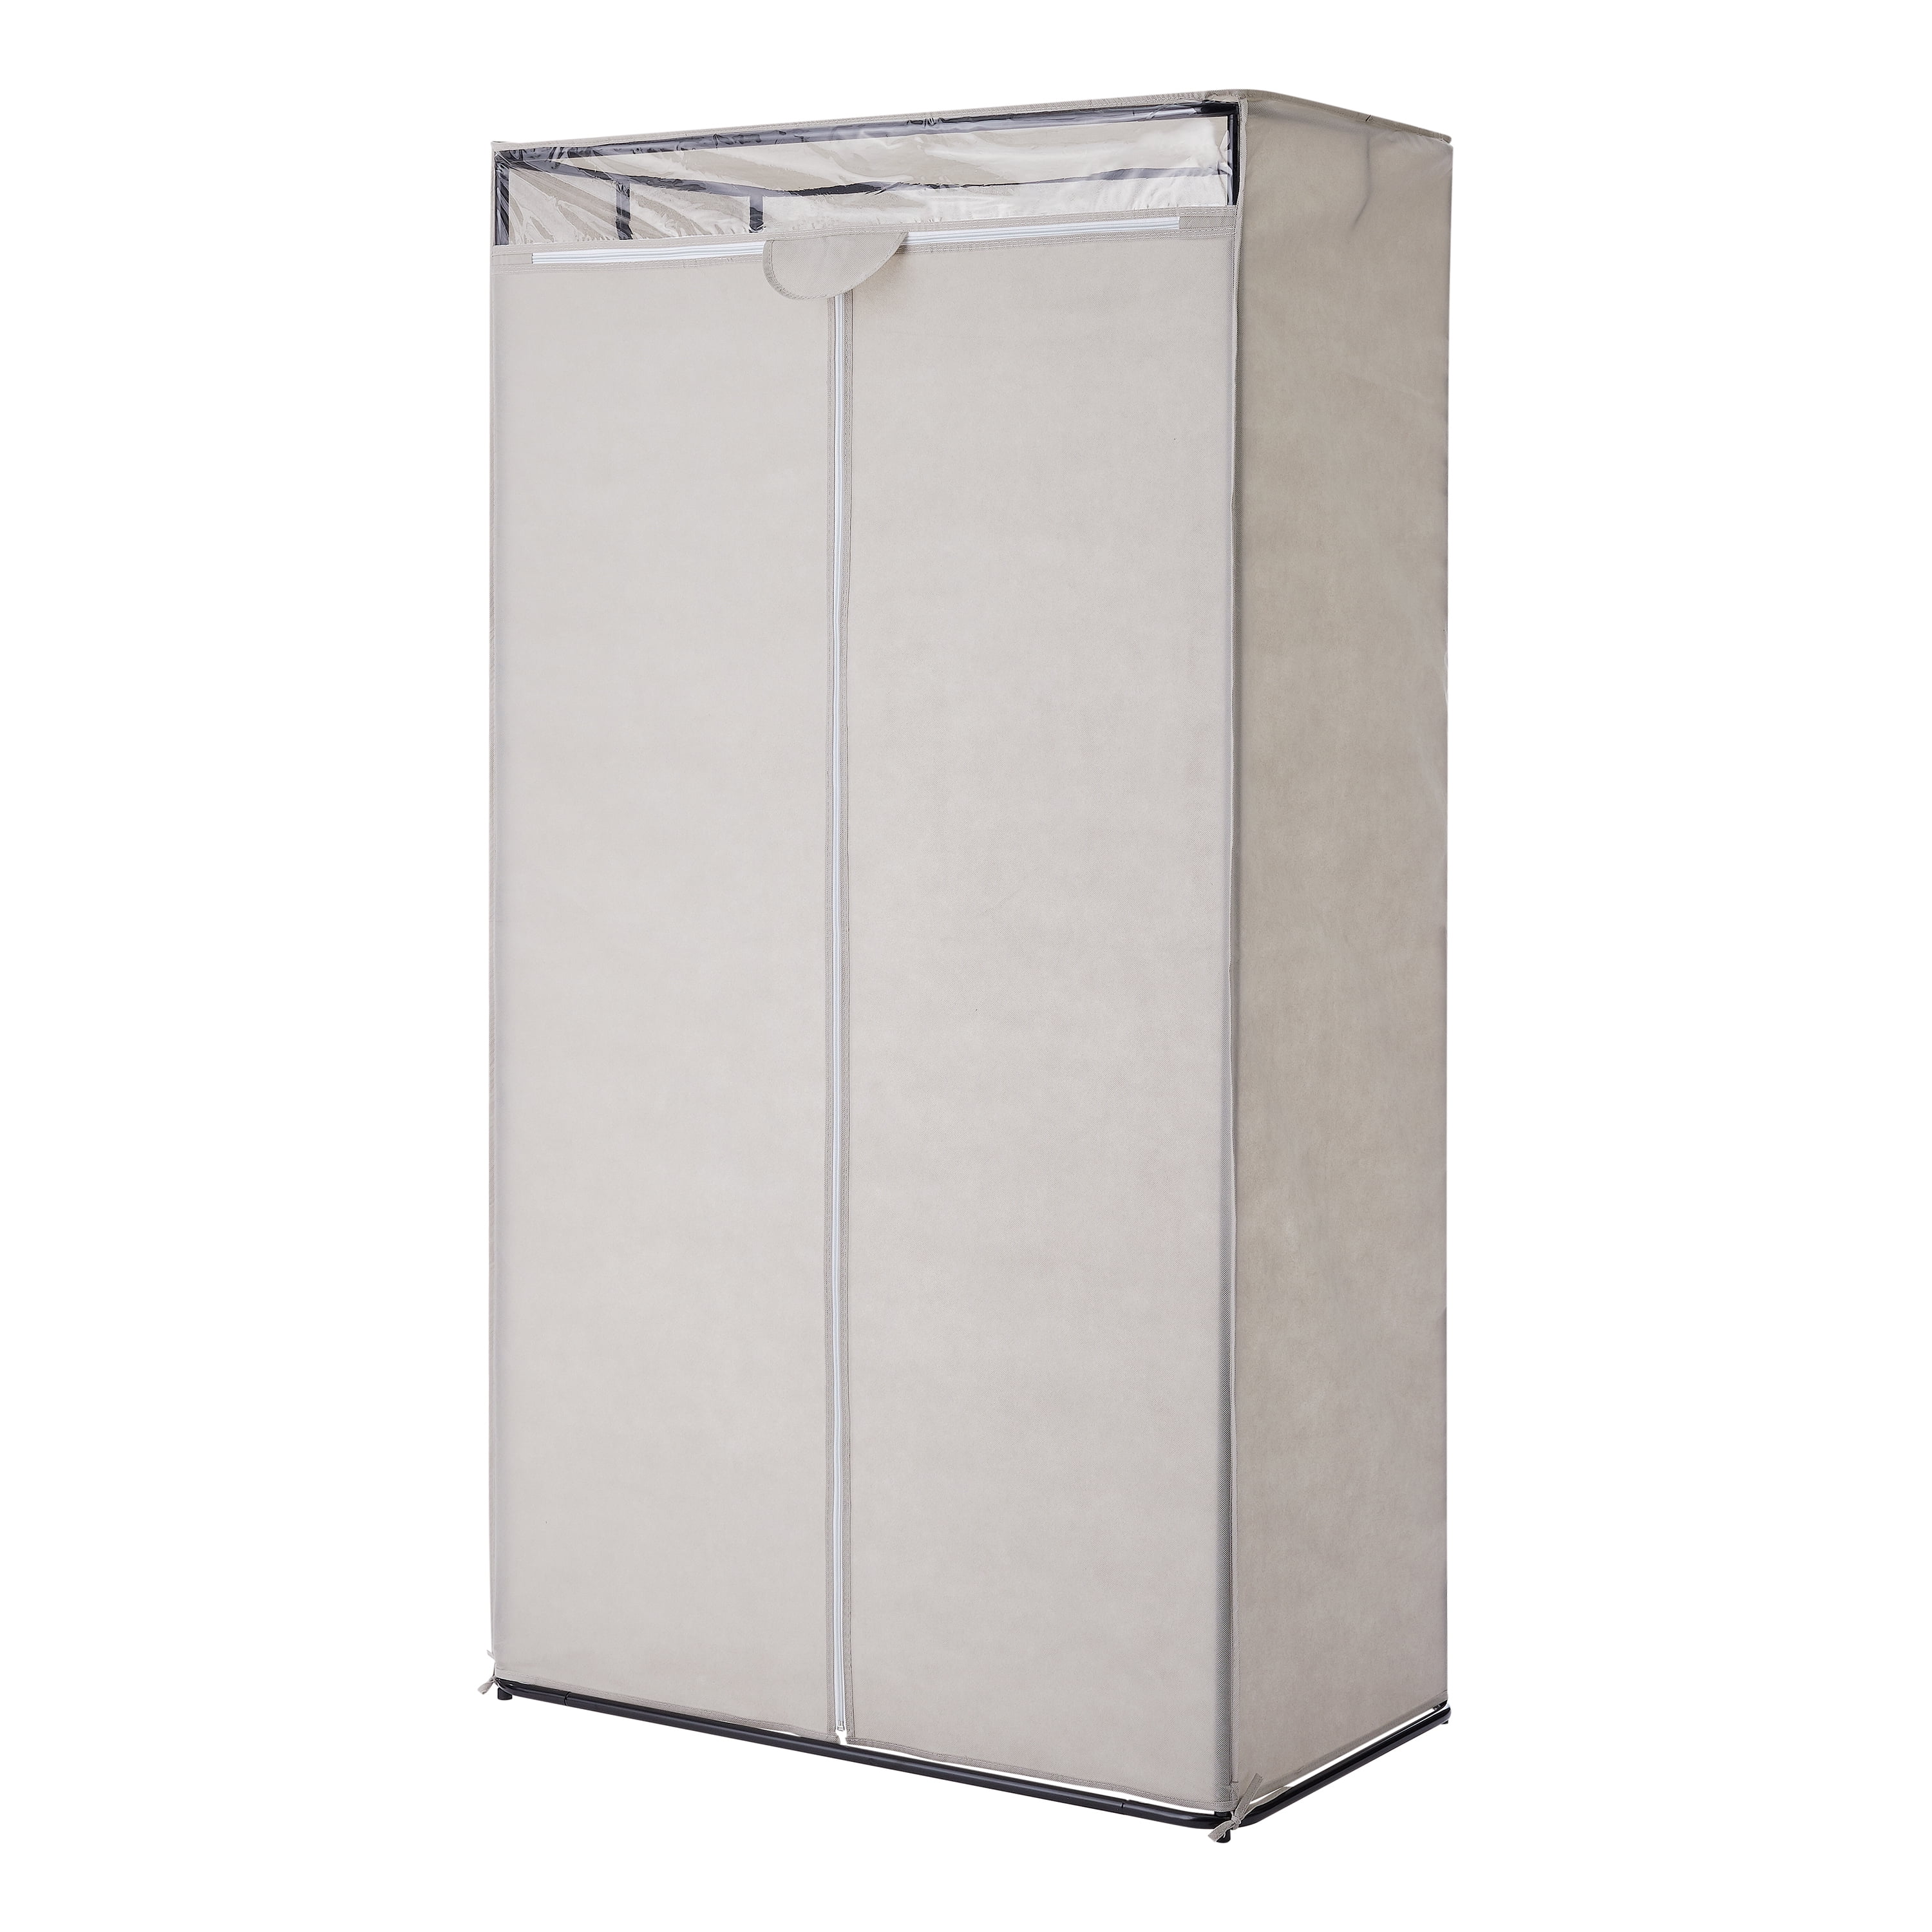 Single Canvas Wardrobe Strong Steel Frame Lightweight Portable Clothes Storage 